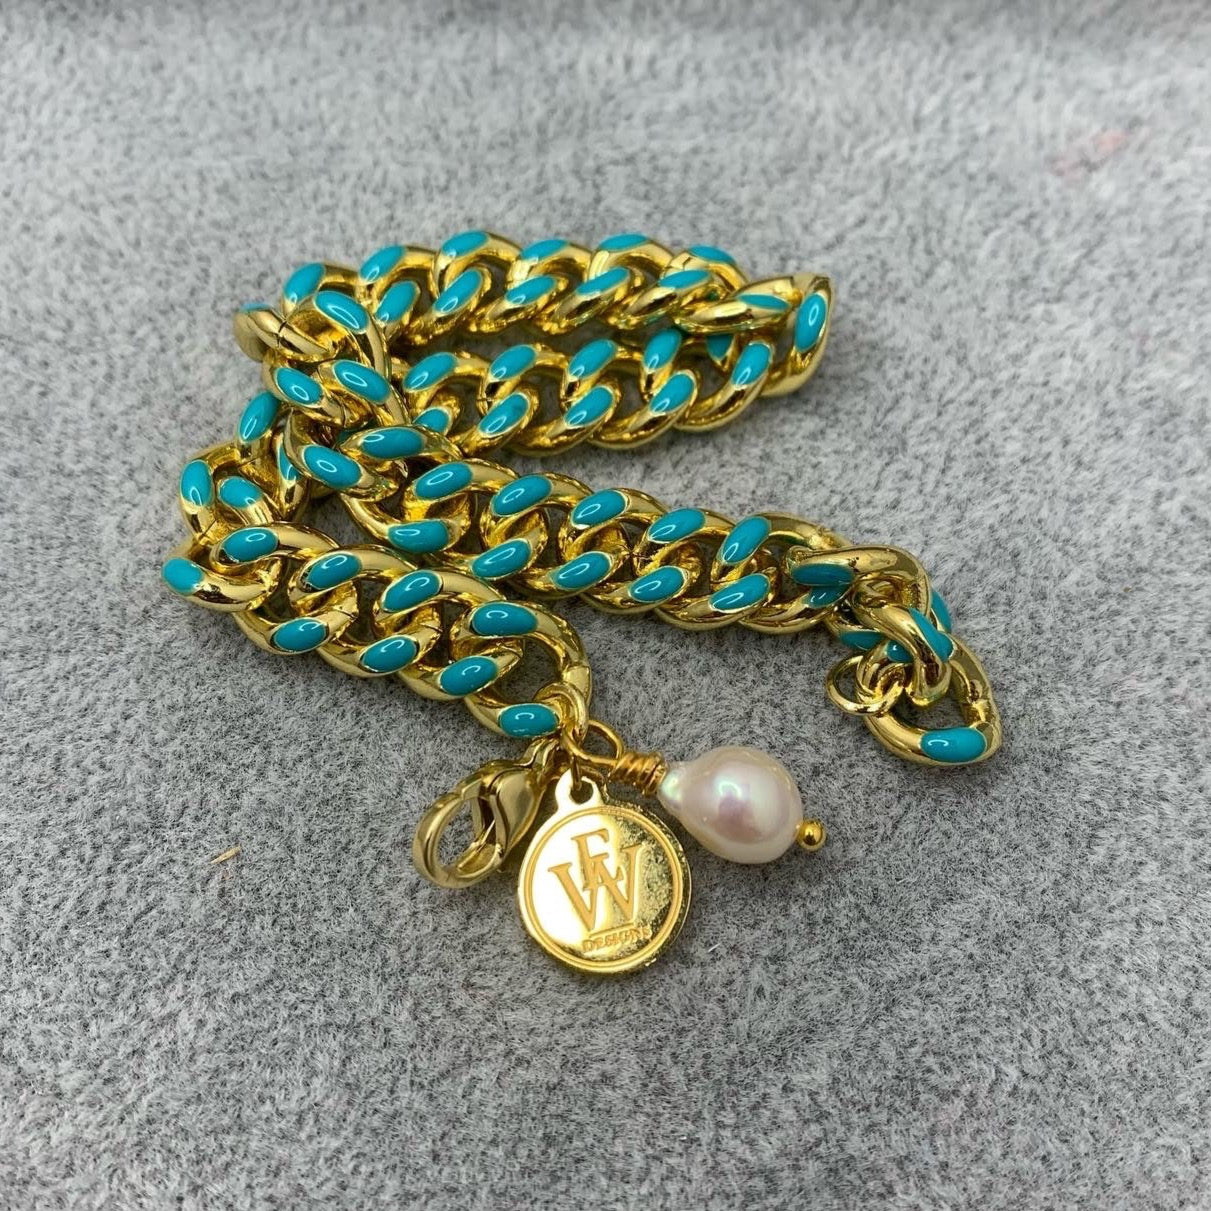 14k Gold Plated Brass Chain Embellished with Turquoise Enamel Bracelet